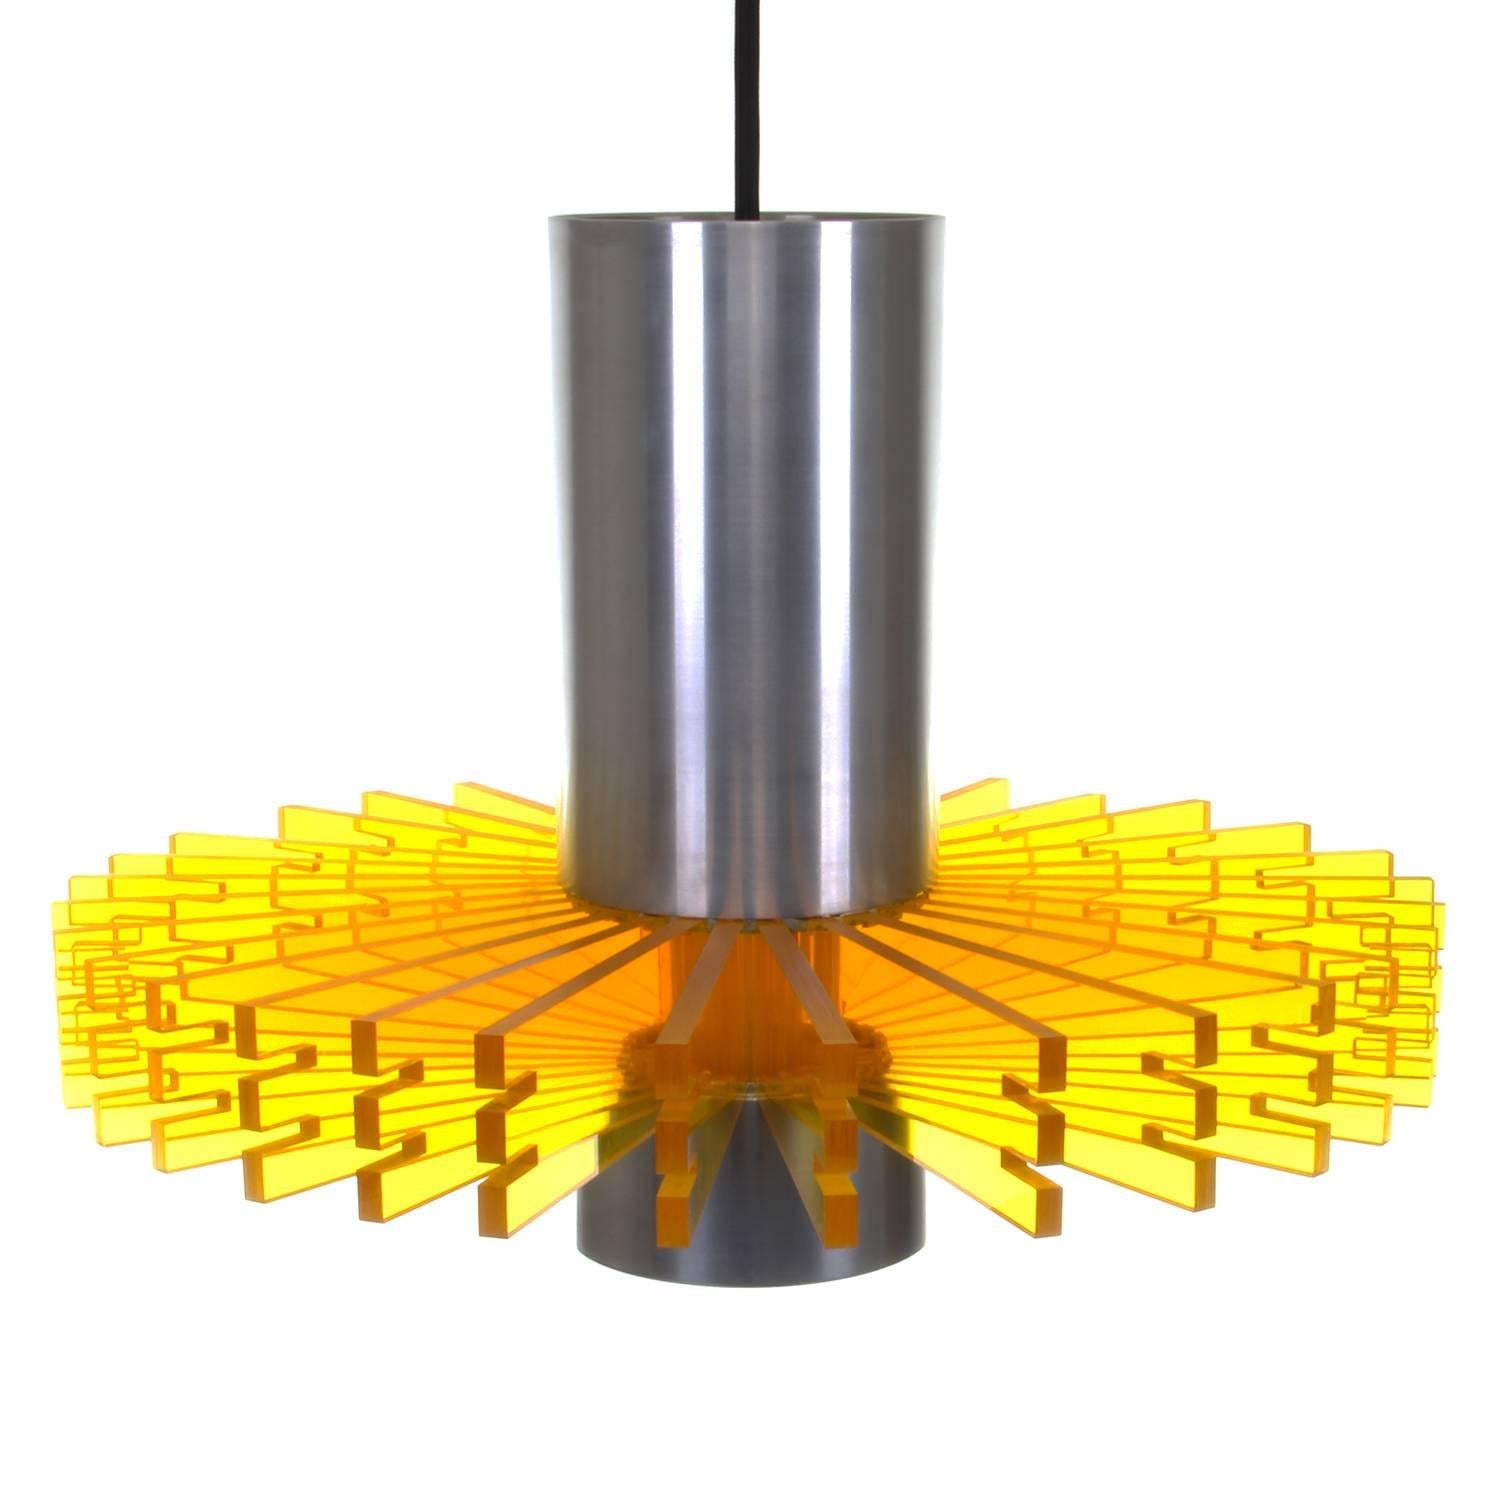 Polished Priest Collar, 'Symfoni' 'Yellow' Pendant Light by Claus Bolby, 1967